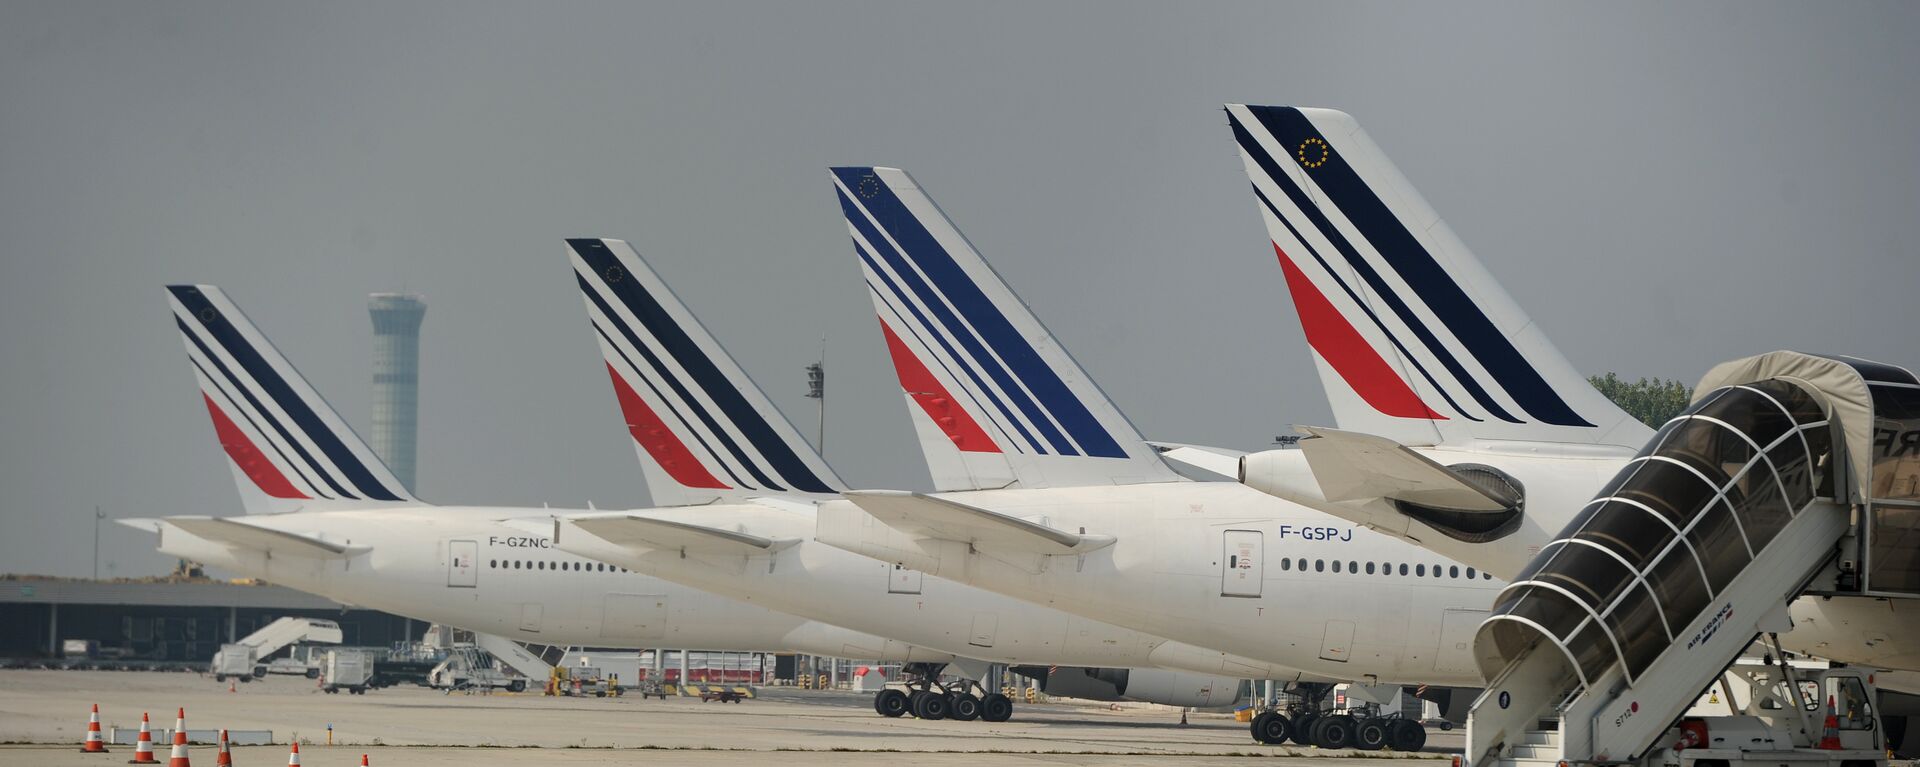 Air France planes are parked on the tarmac of Charles de Gaulle airport on September 24, 2014 in Roissy during an Air France pilots strike - Sputnik International, 1920, 24.09.2022